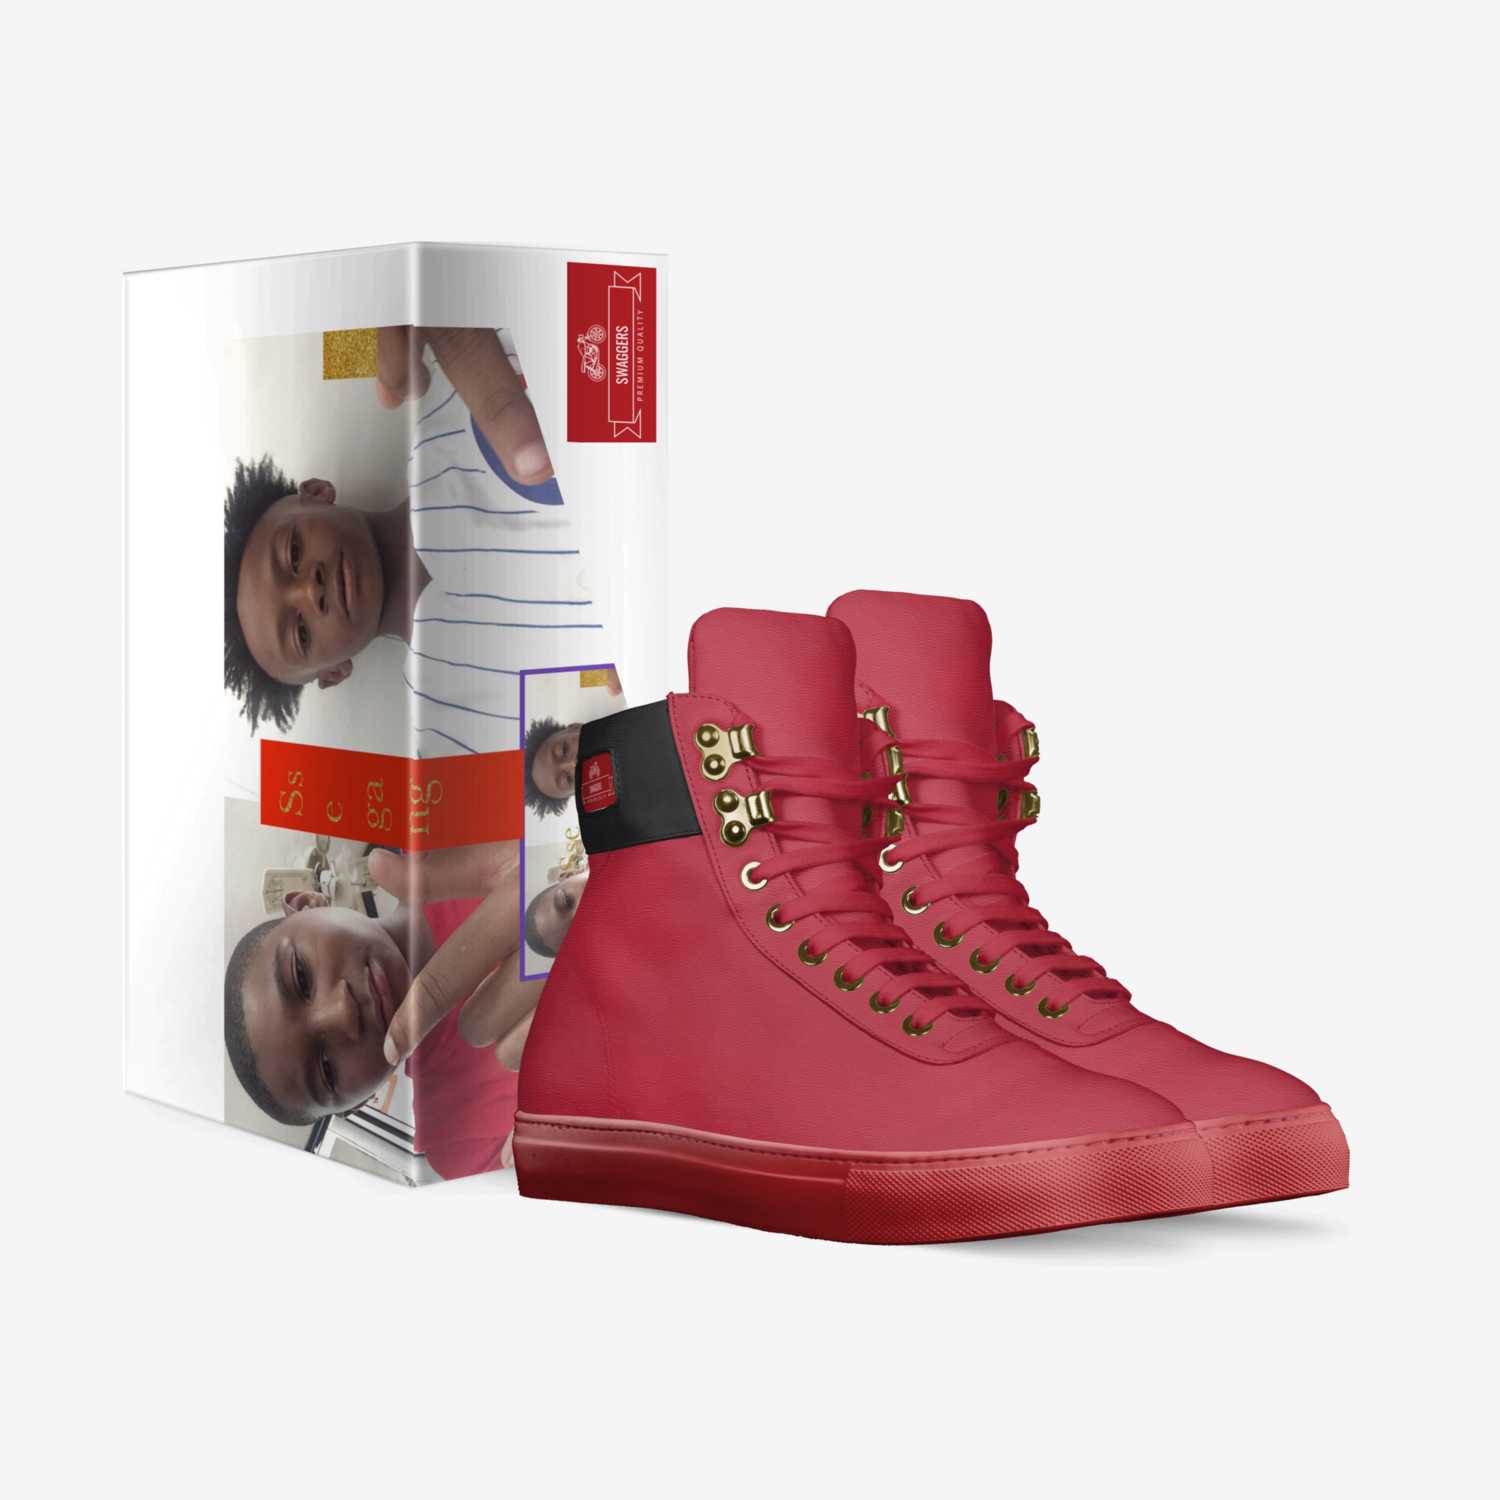 Swaggers custom made in Italy shoes by Chanceharris | Box view